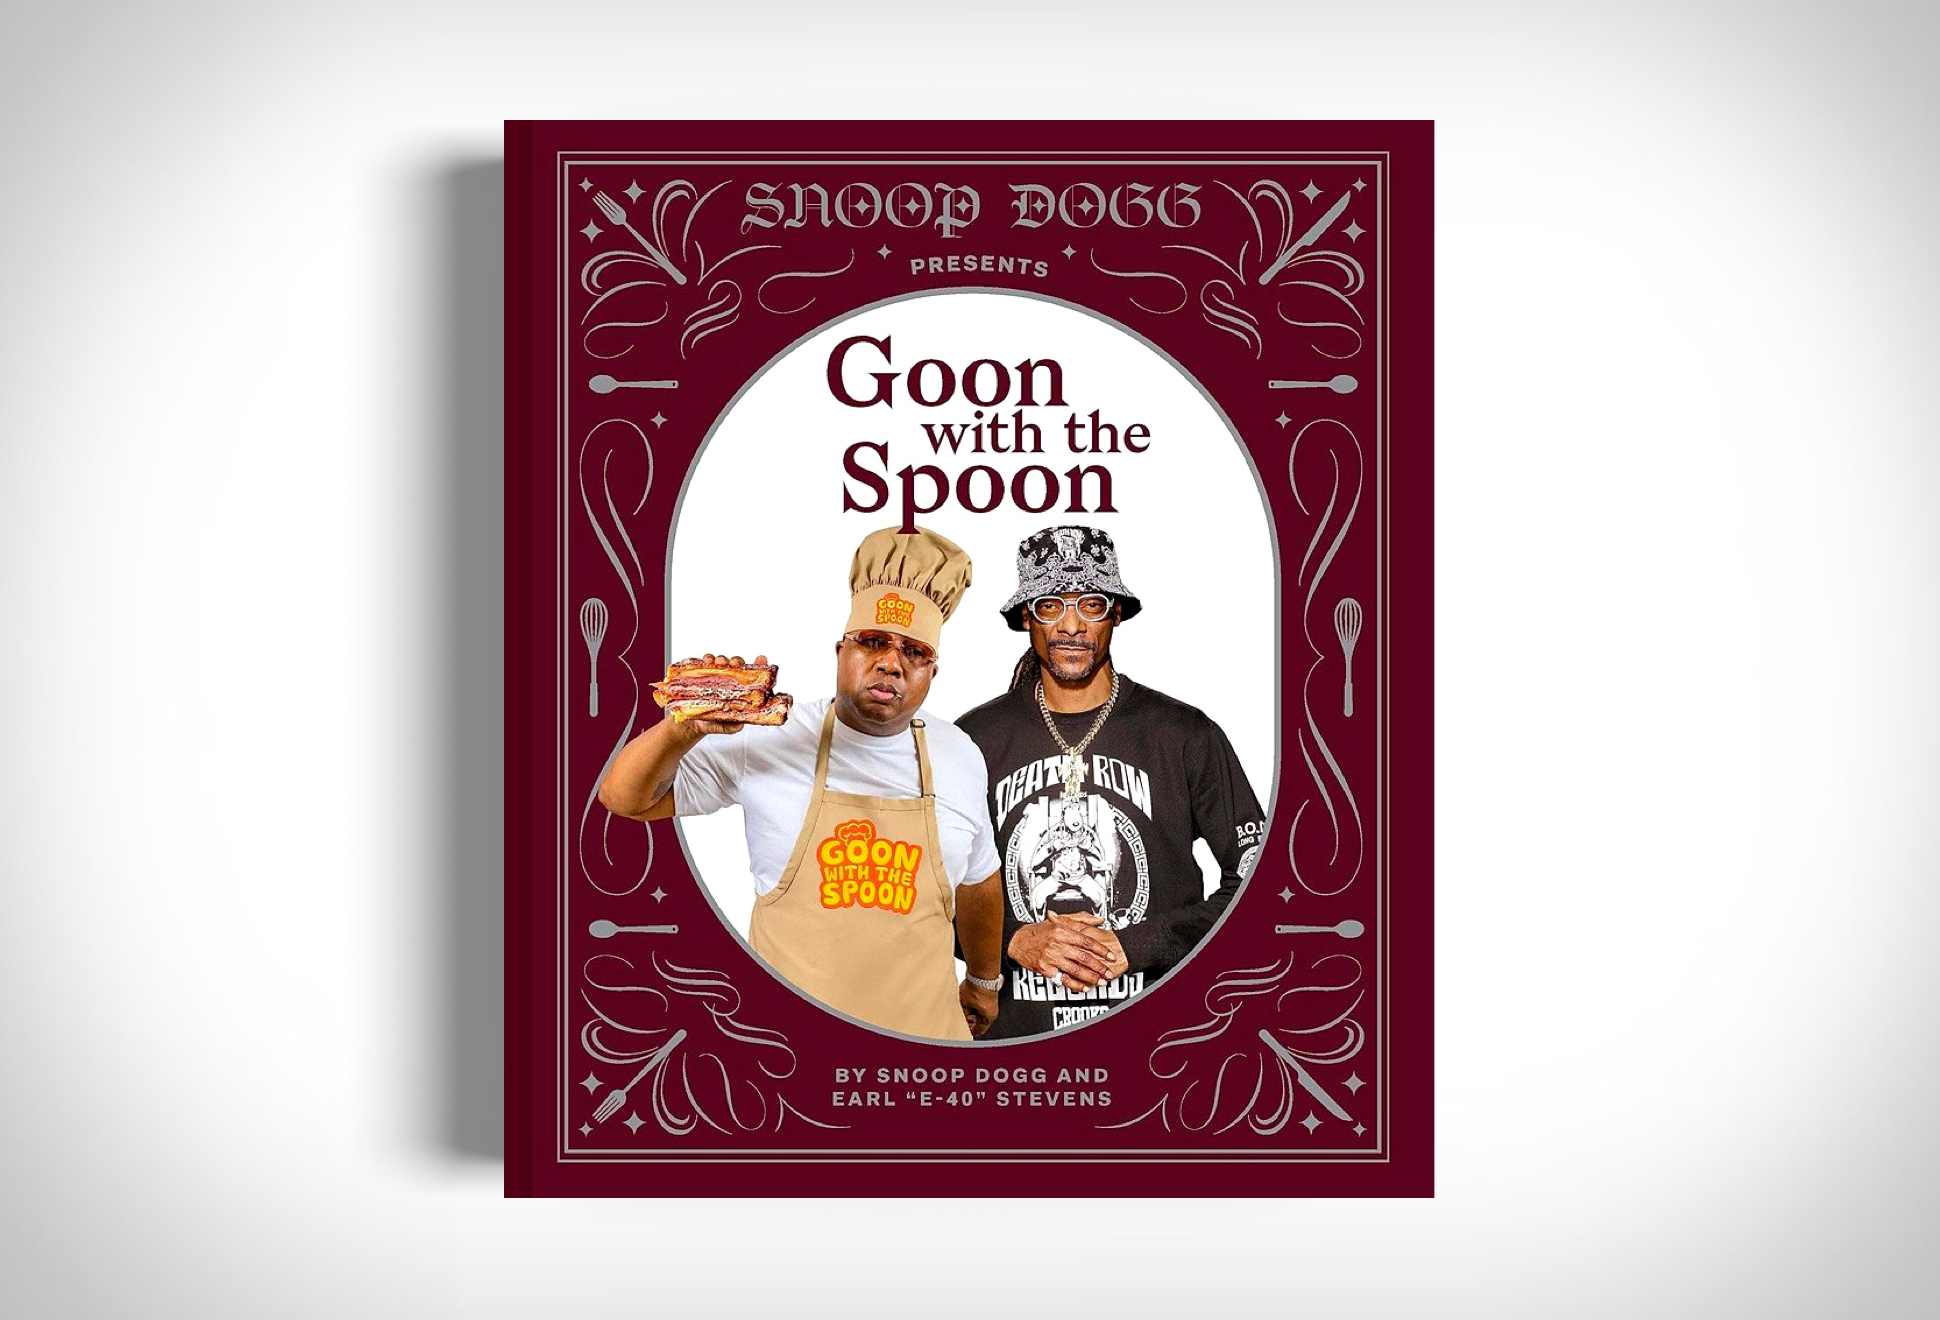 Snoop Dogg Presents Goon with the Spoon | Image